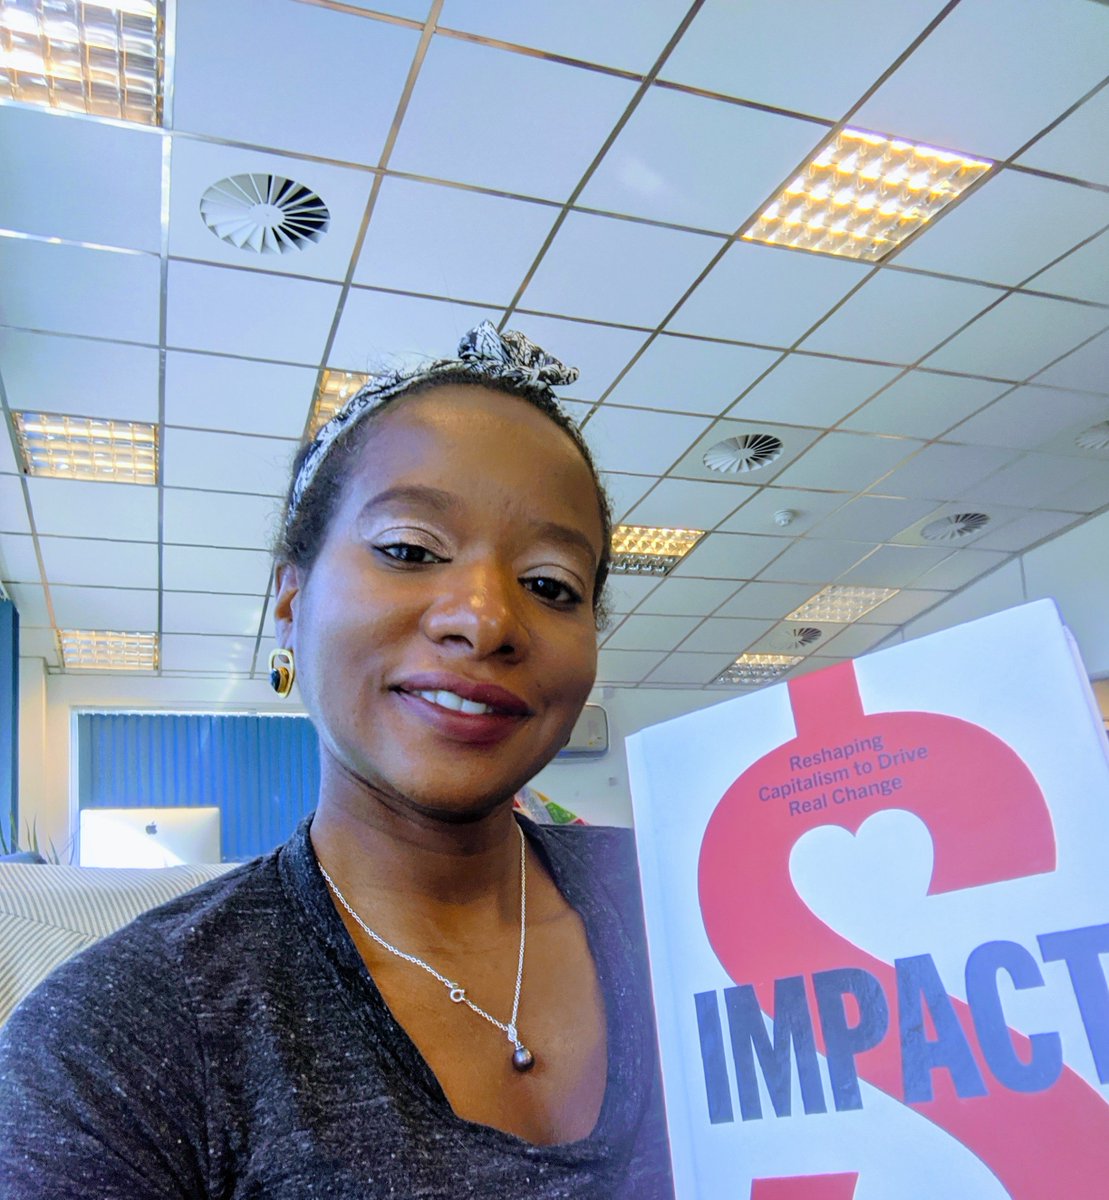 Highly recommend Impact, new book by @sirronniecohen - shows how we can all play our part in improving the world & a blueprint for positive change. Read my review of the book! tinyurl.com/y5axh7zn #impactrevolution #impactinvesting #impinv